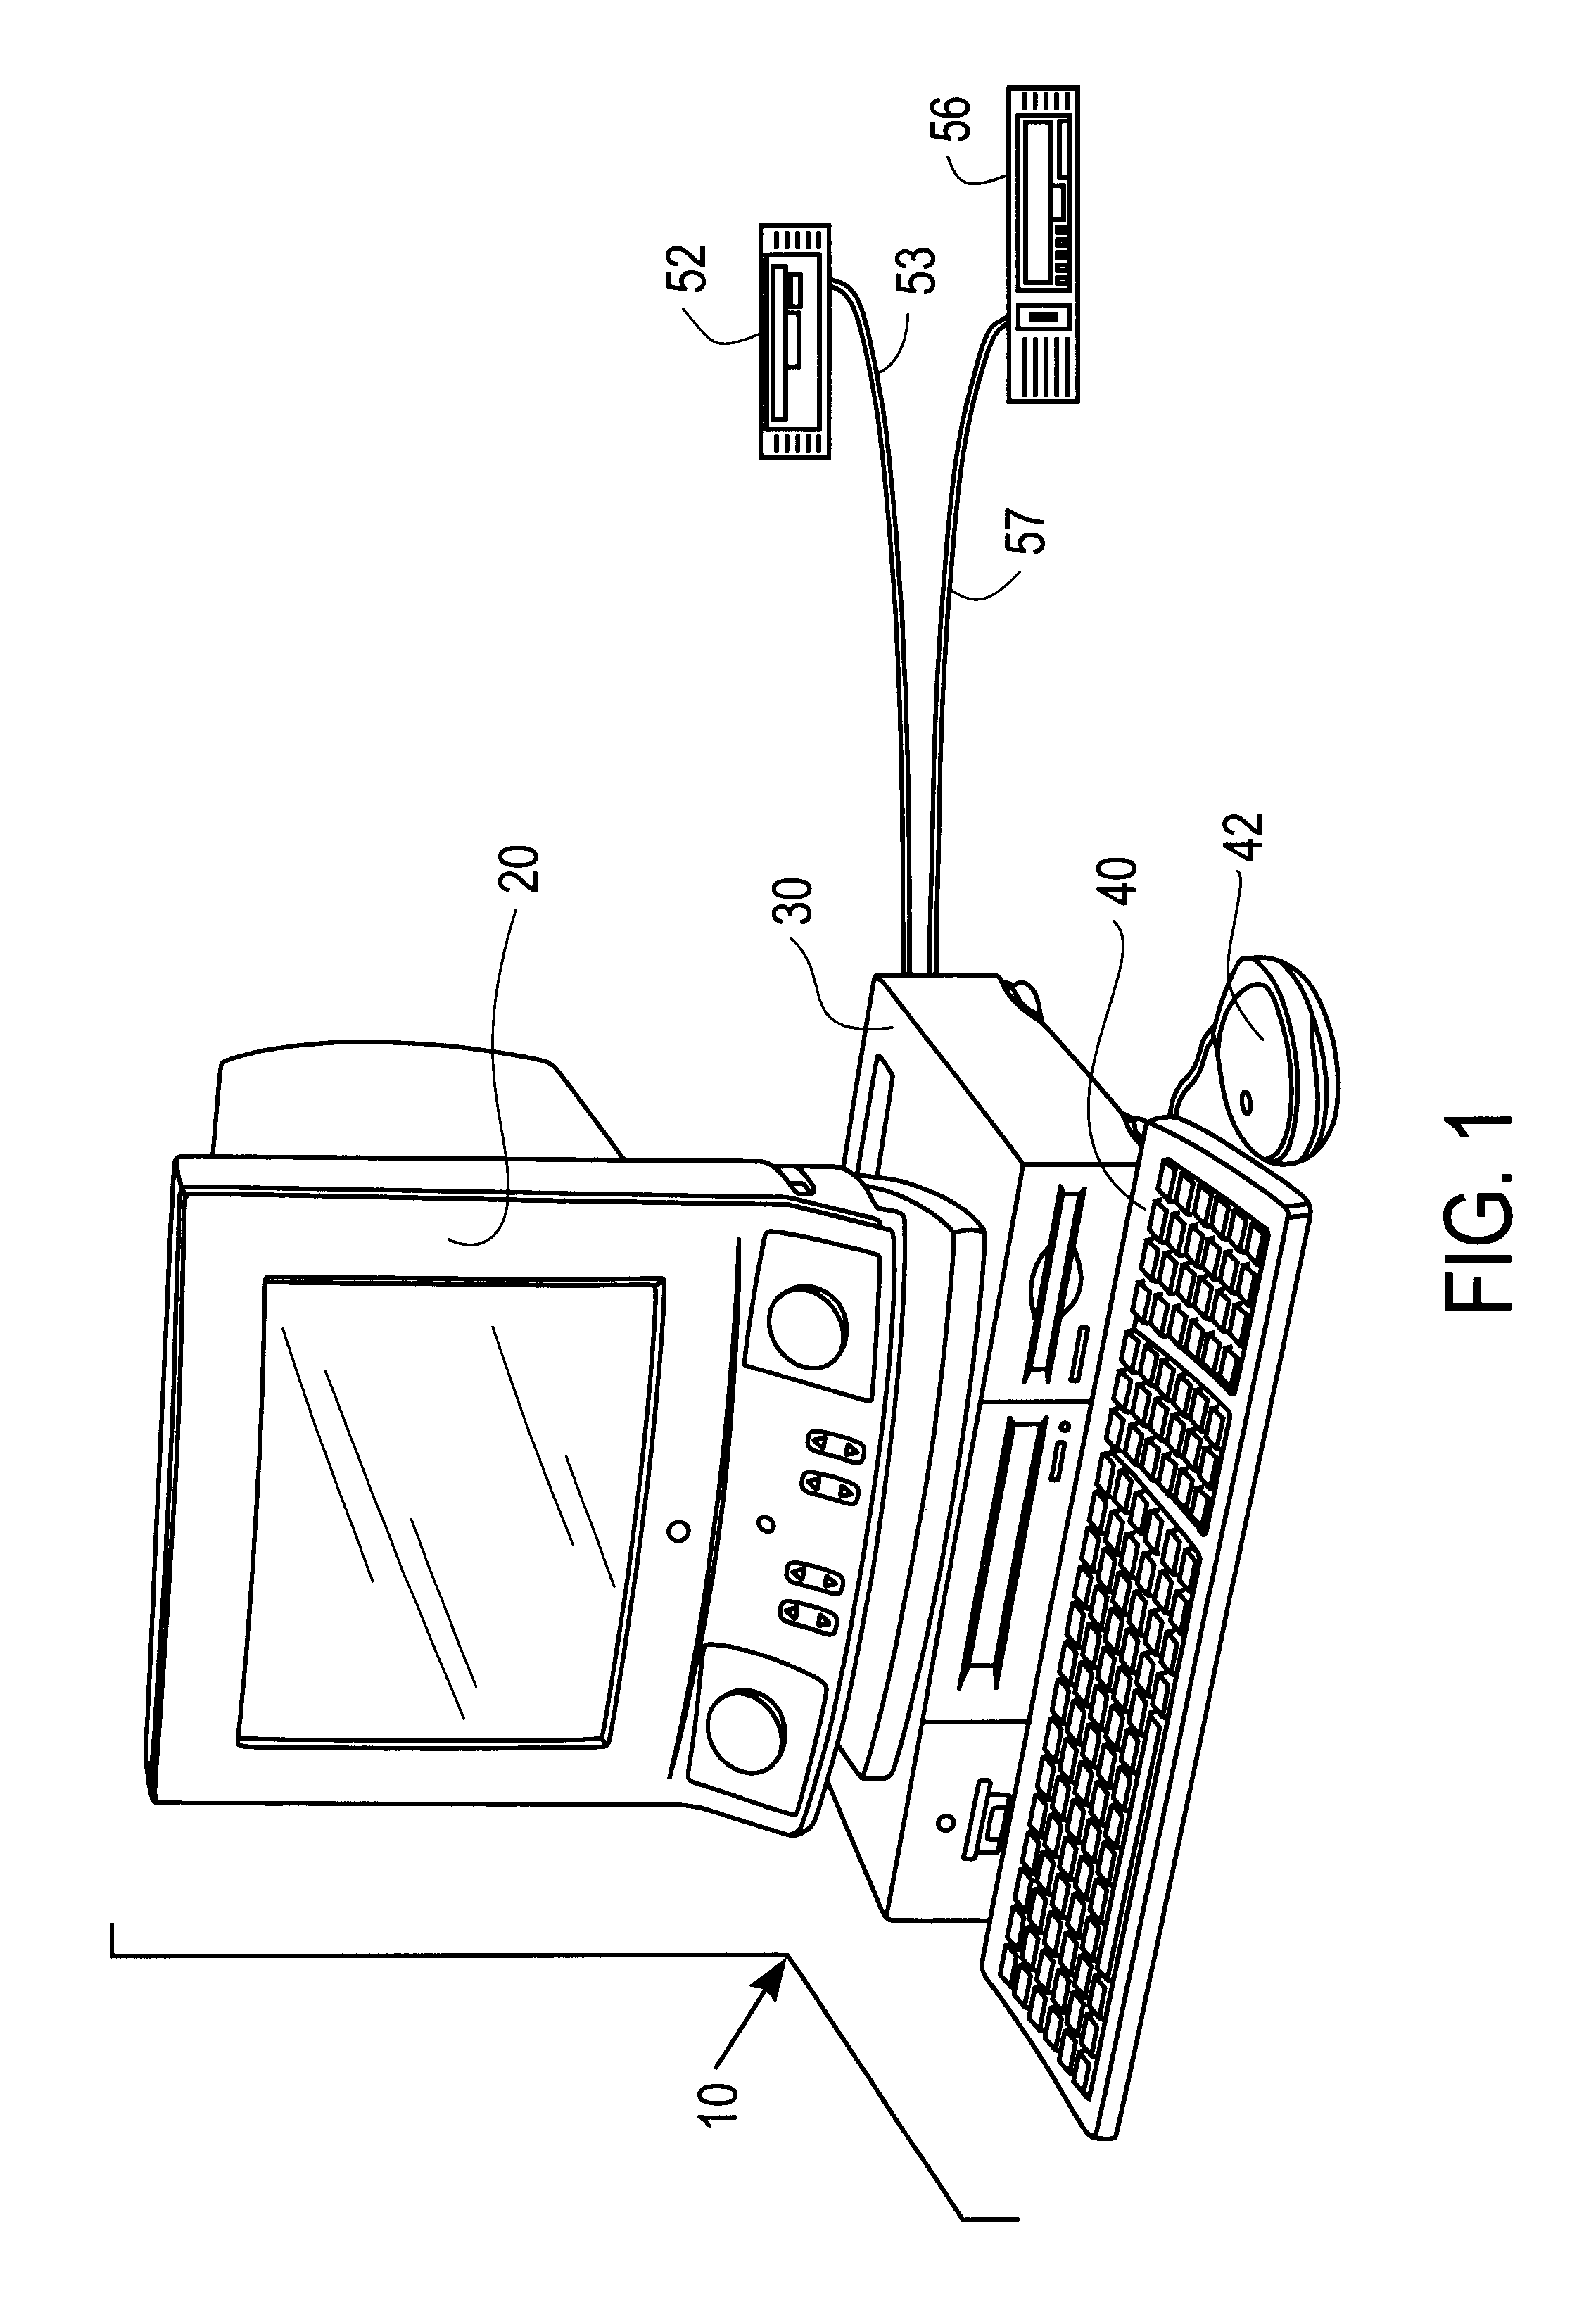 Method and apparatus for a digital video cassette (DVC) decode system